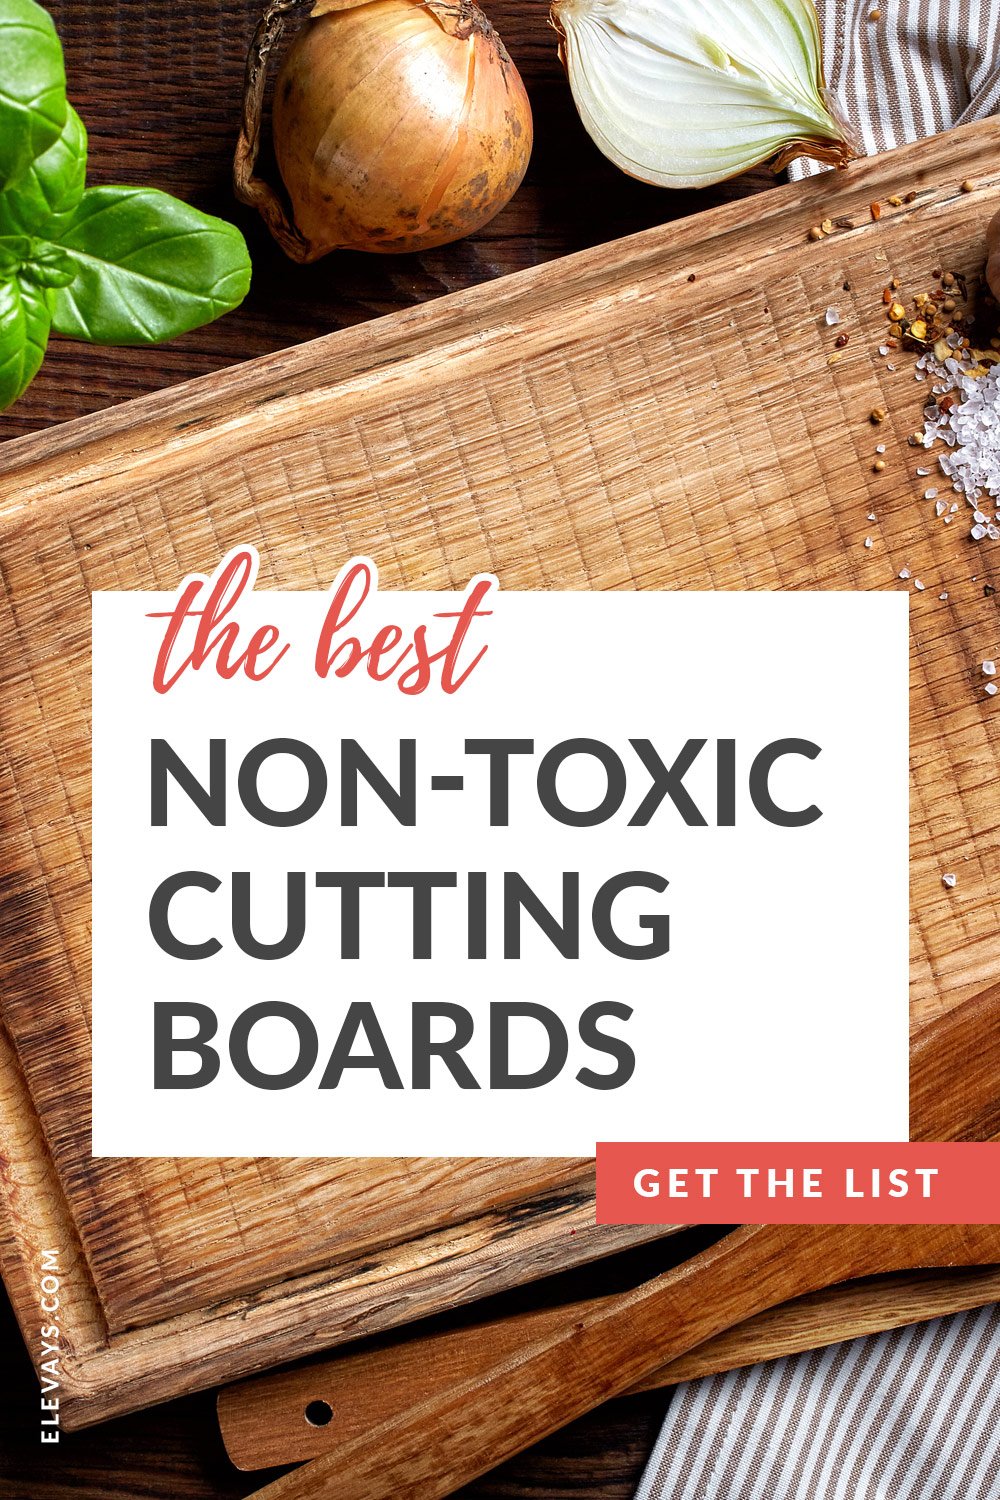 The Best Non-Toxic Cutting Boards for your Chemical Free Kitchen